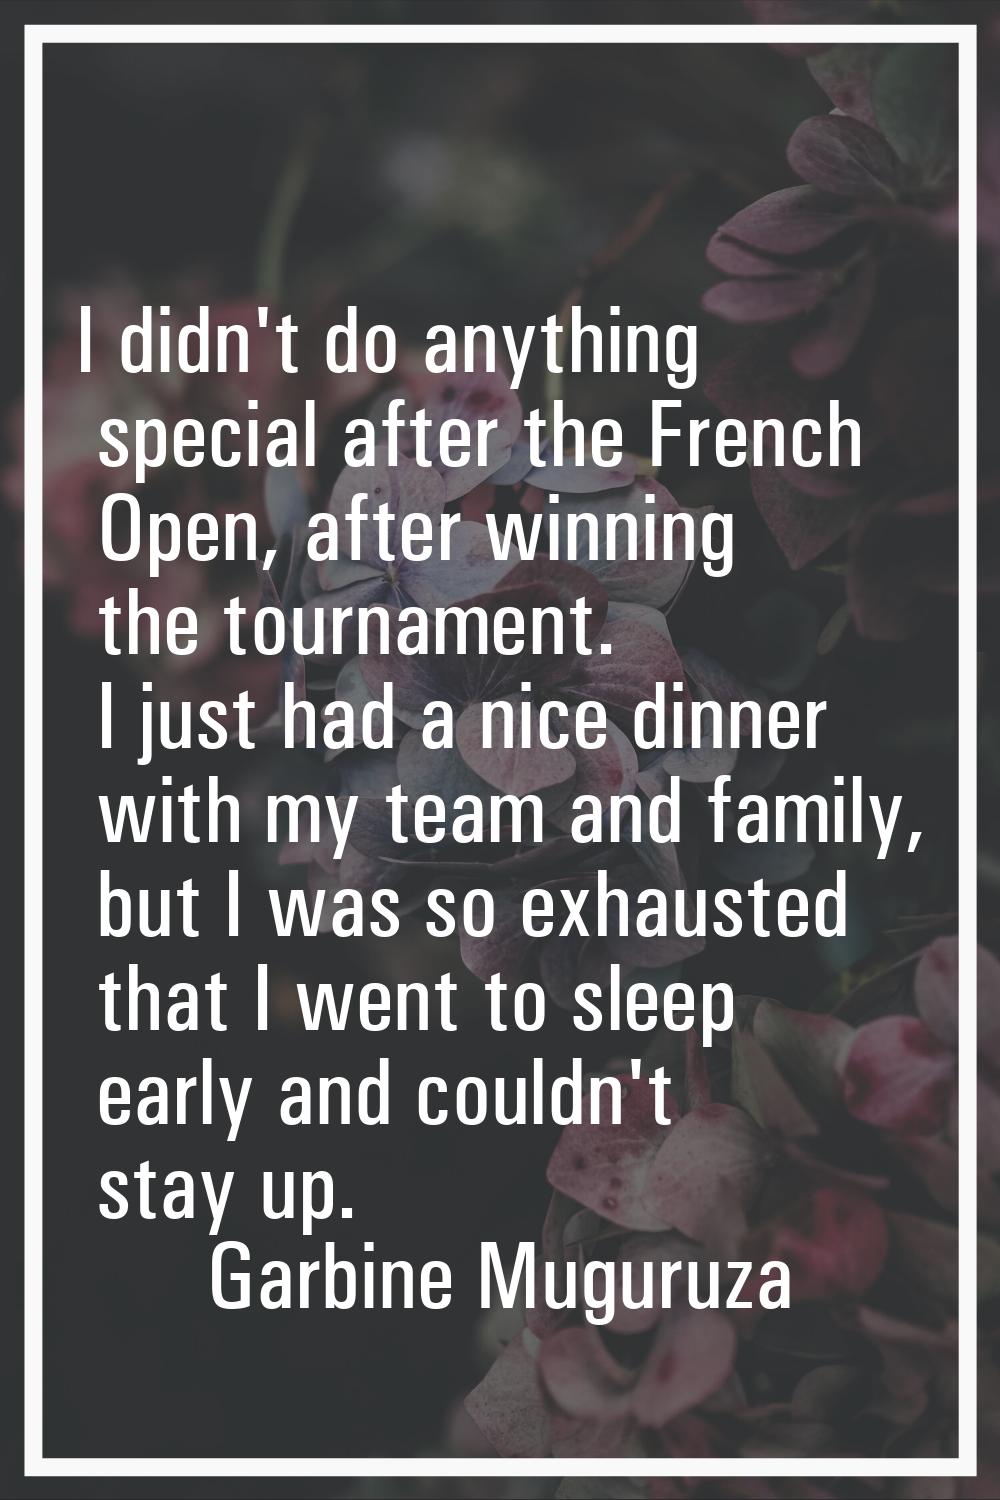 I didn't do anything special after the French Open, after winning the tournament. I just had a nice